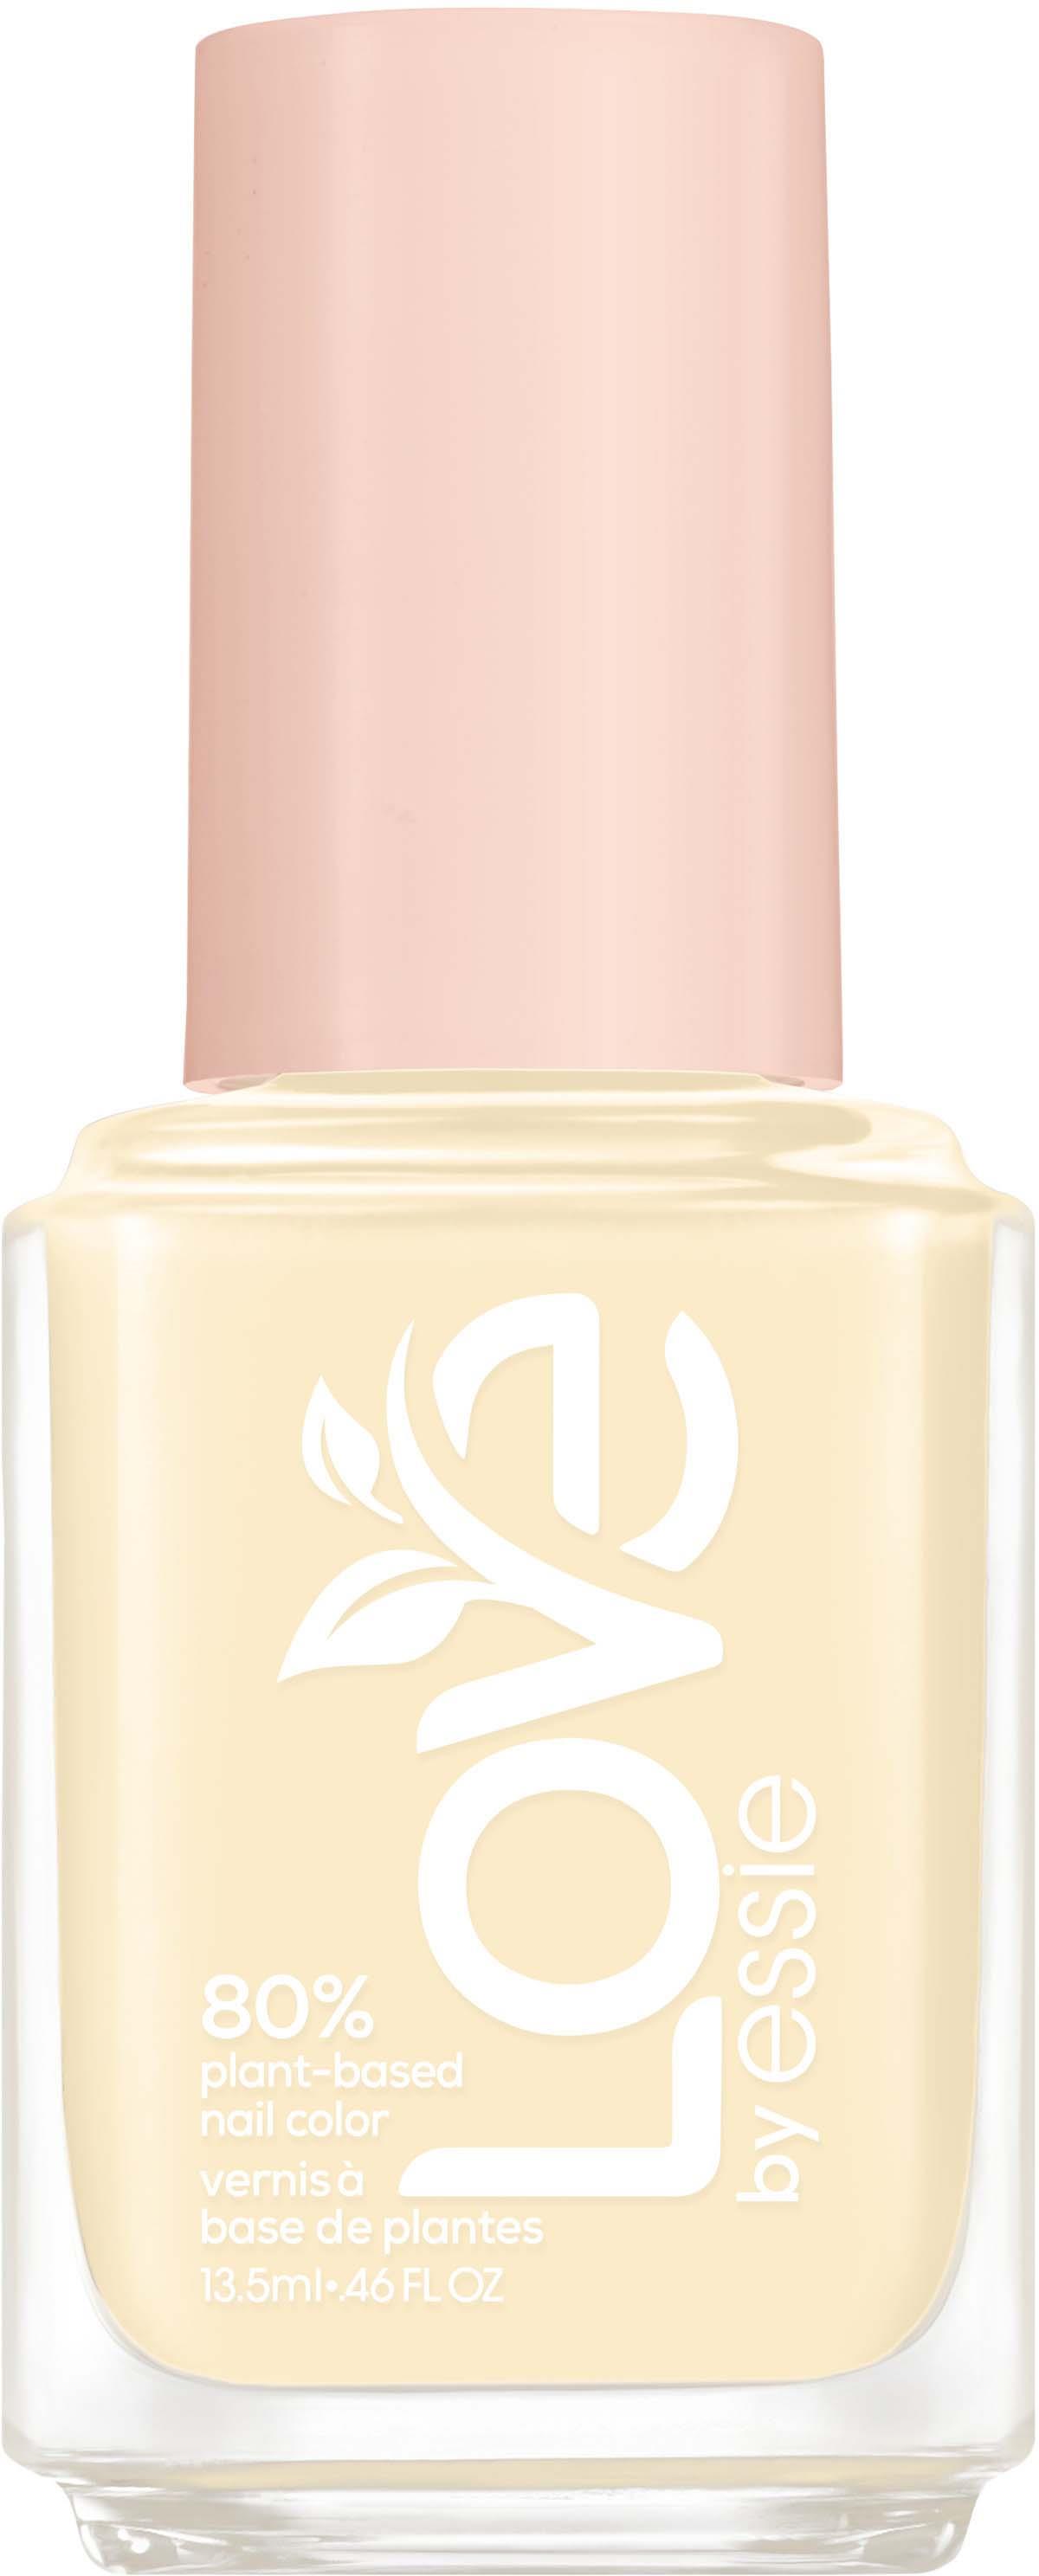 Side The by Nail Essie 230 80% Essie Brighter Plant-based Color On LOVE